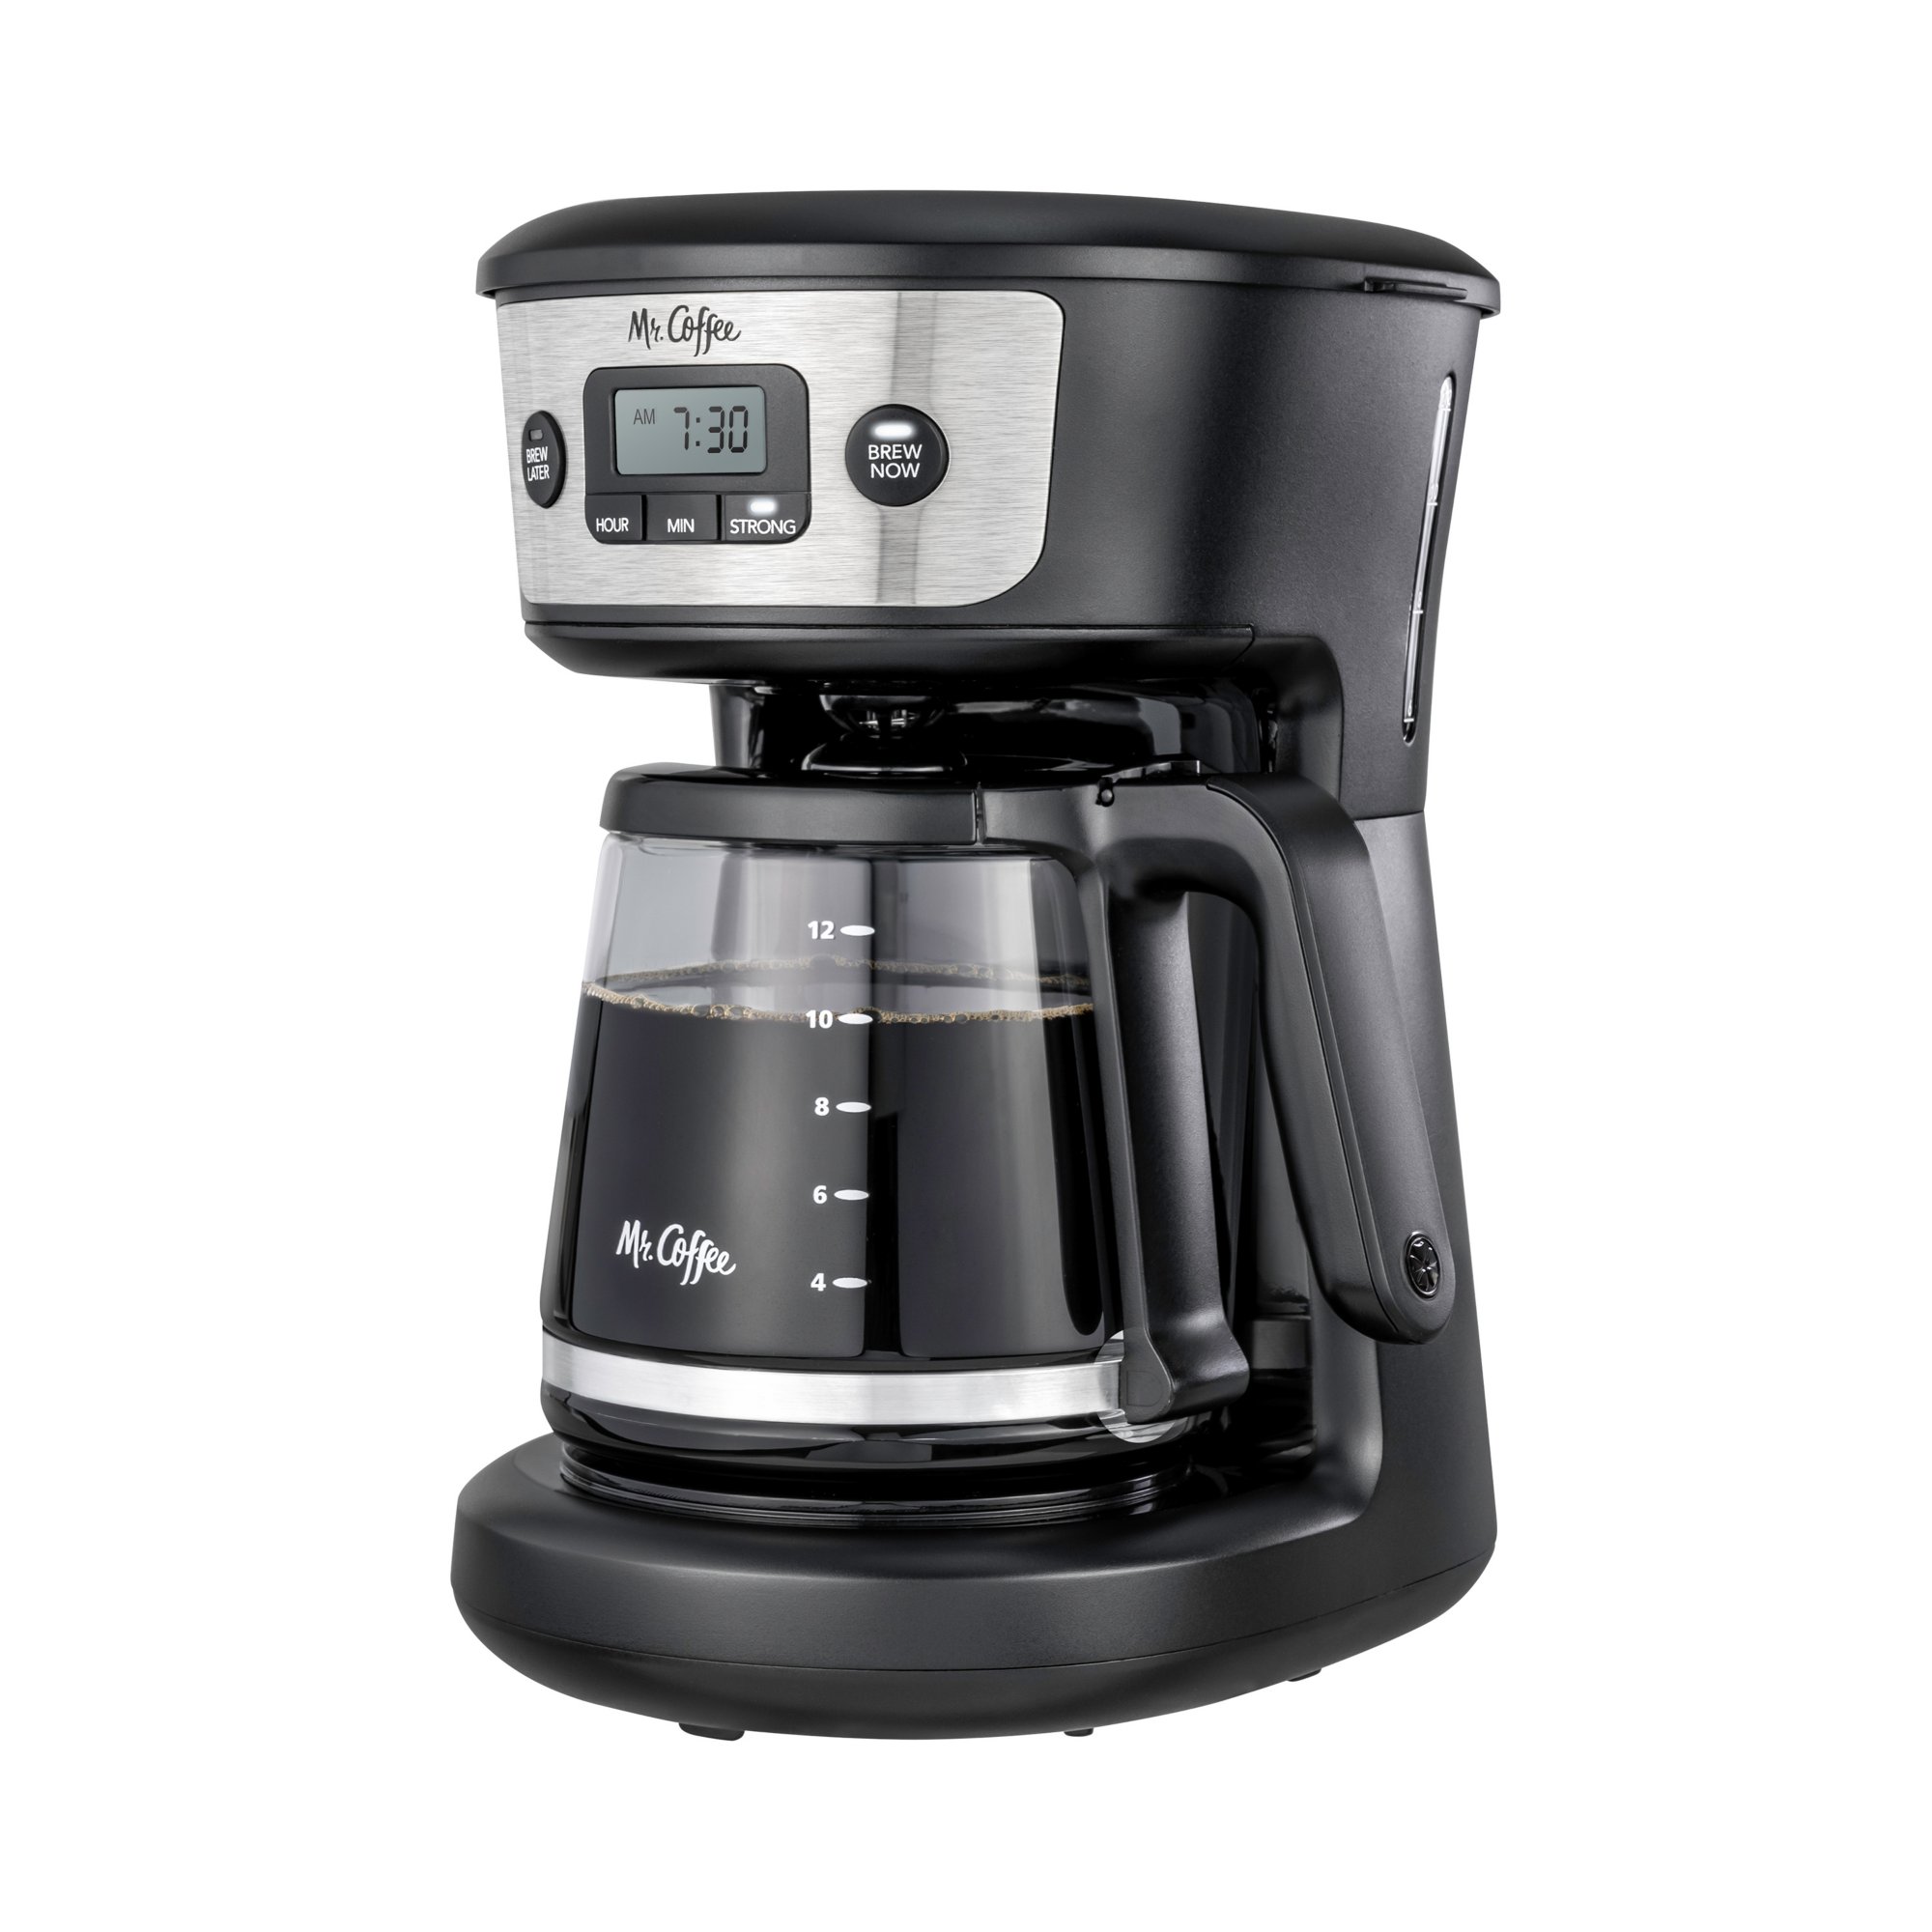 Mr Coffee: A Coveted Collection: Mr. Coffee Specialty Coffeemakers